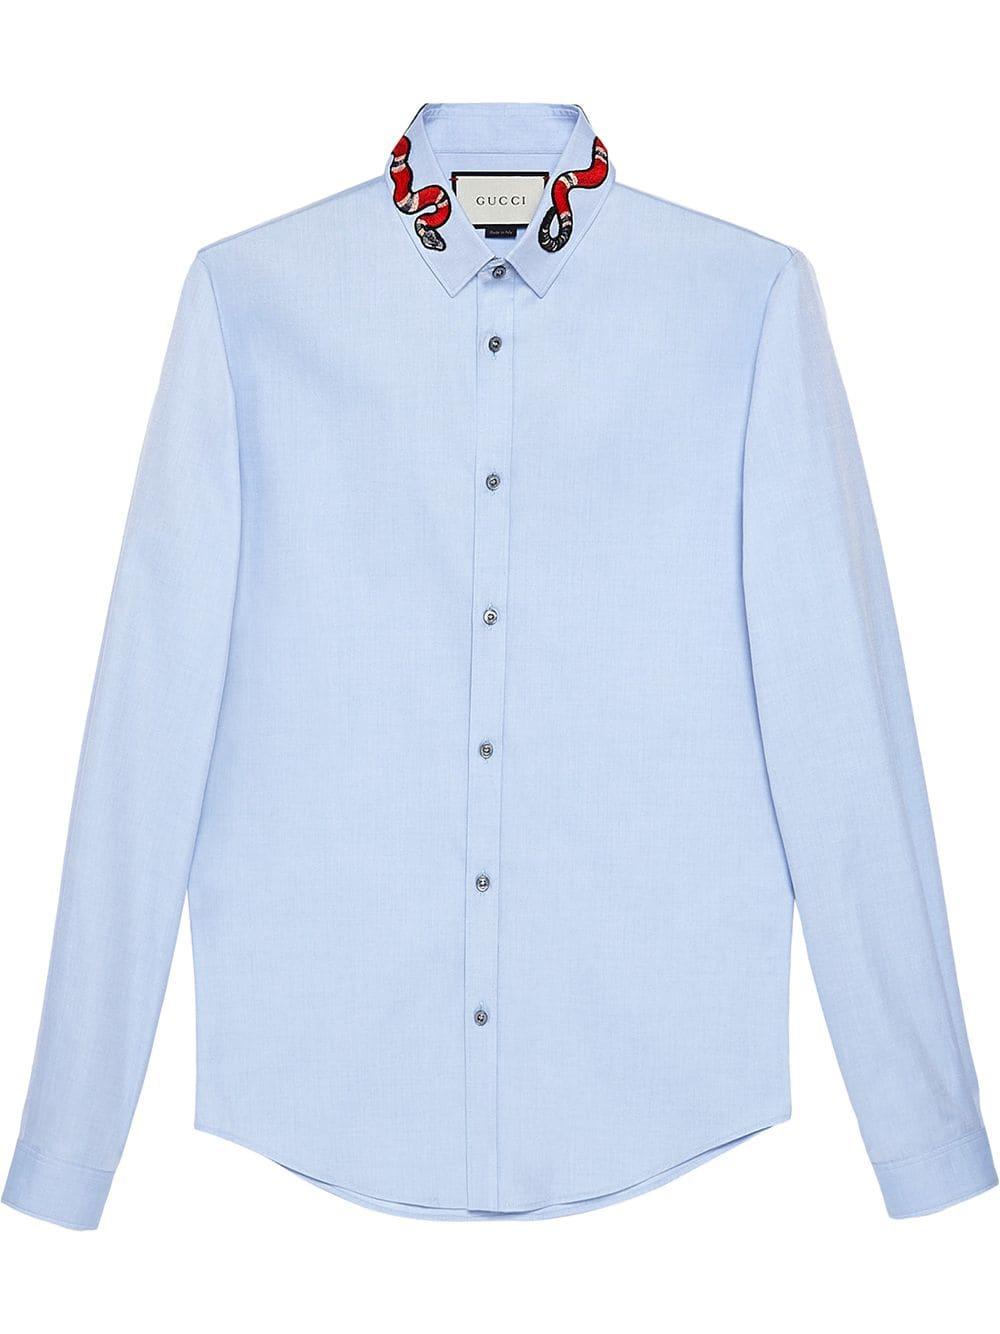 Gucci Cotton Oxford Duke Shirt With Kingsnake in Blue for Men - Save 4% ...